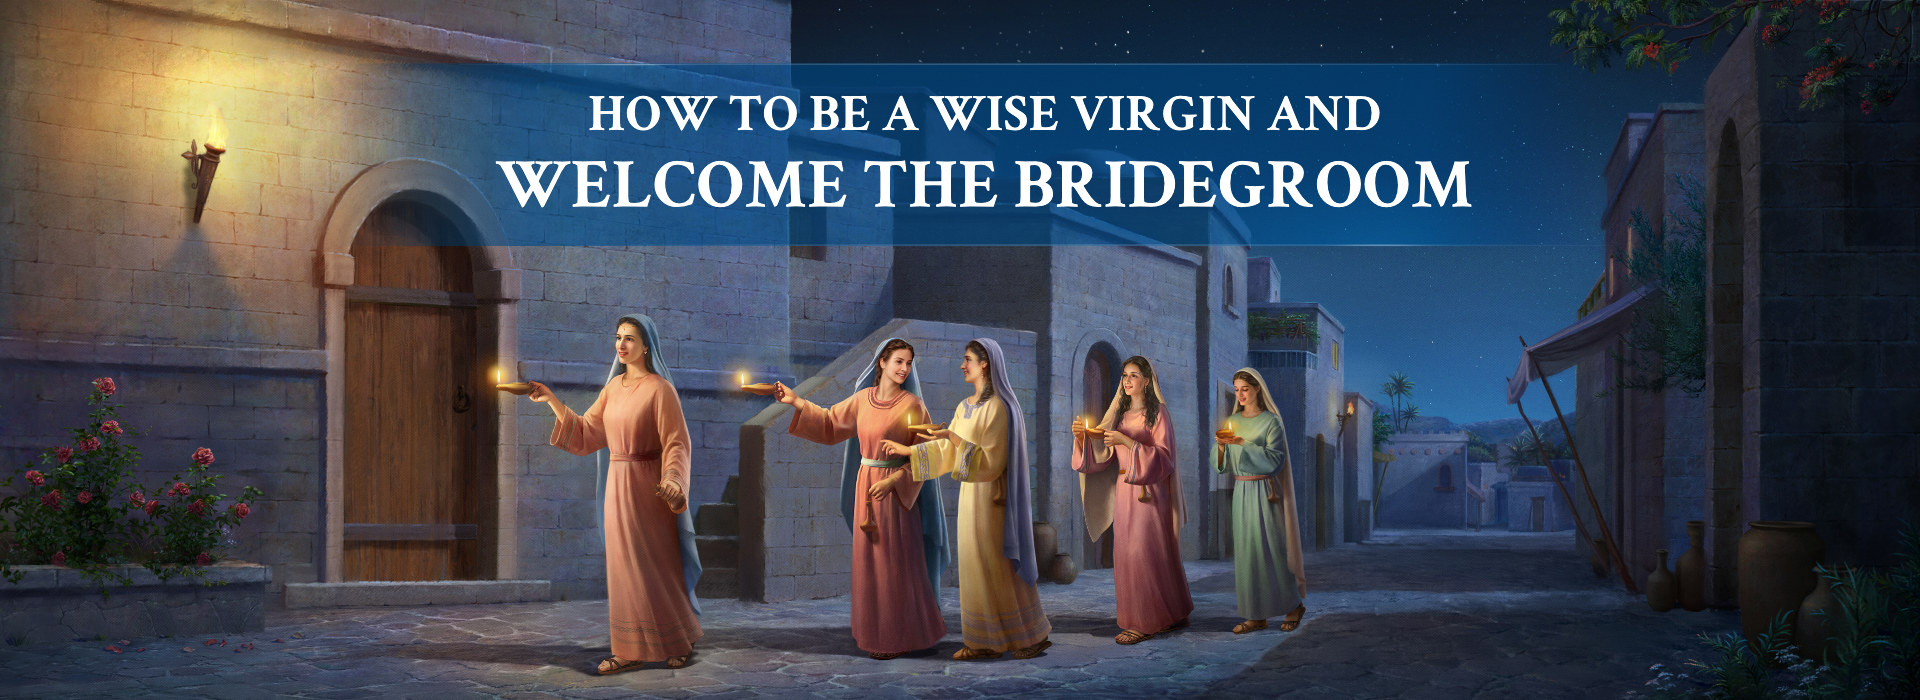 How to Be a Wise Virgin and Welcome the Bridegroom